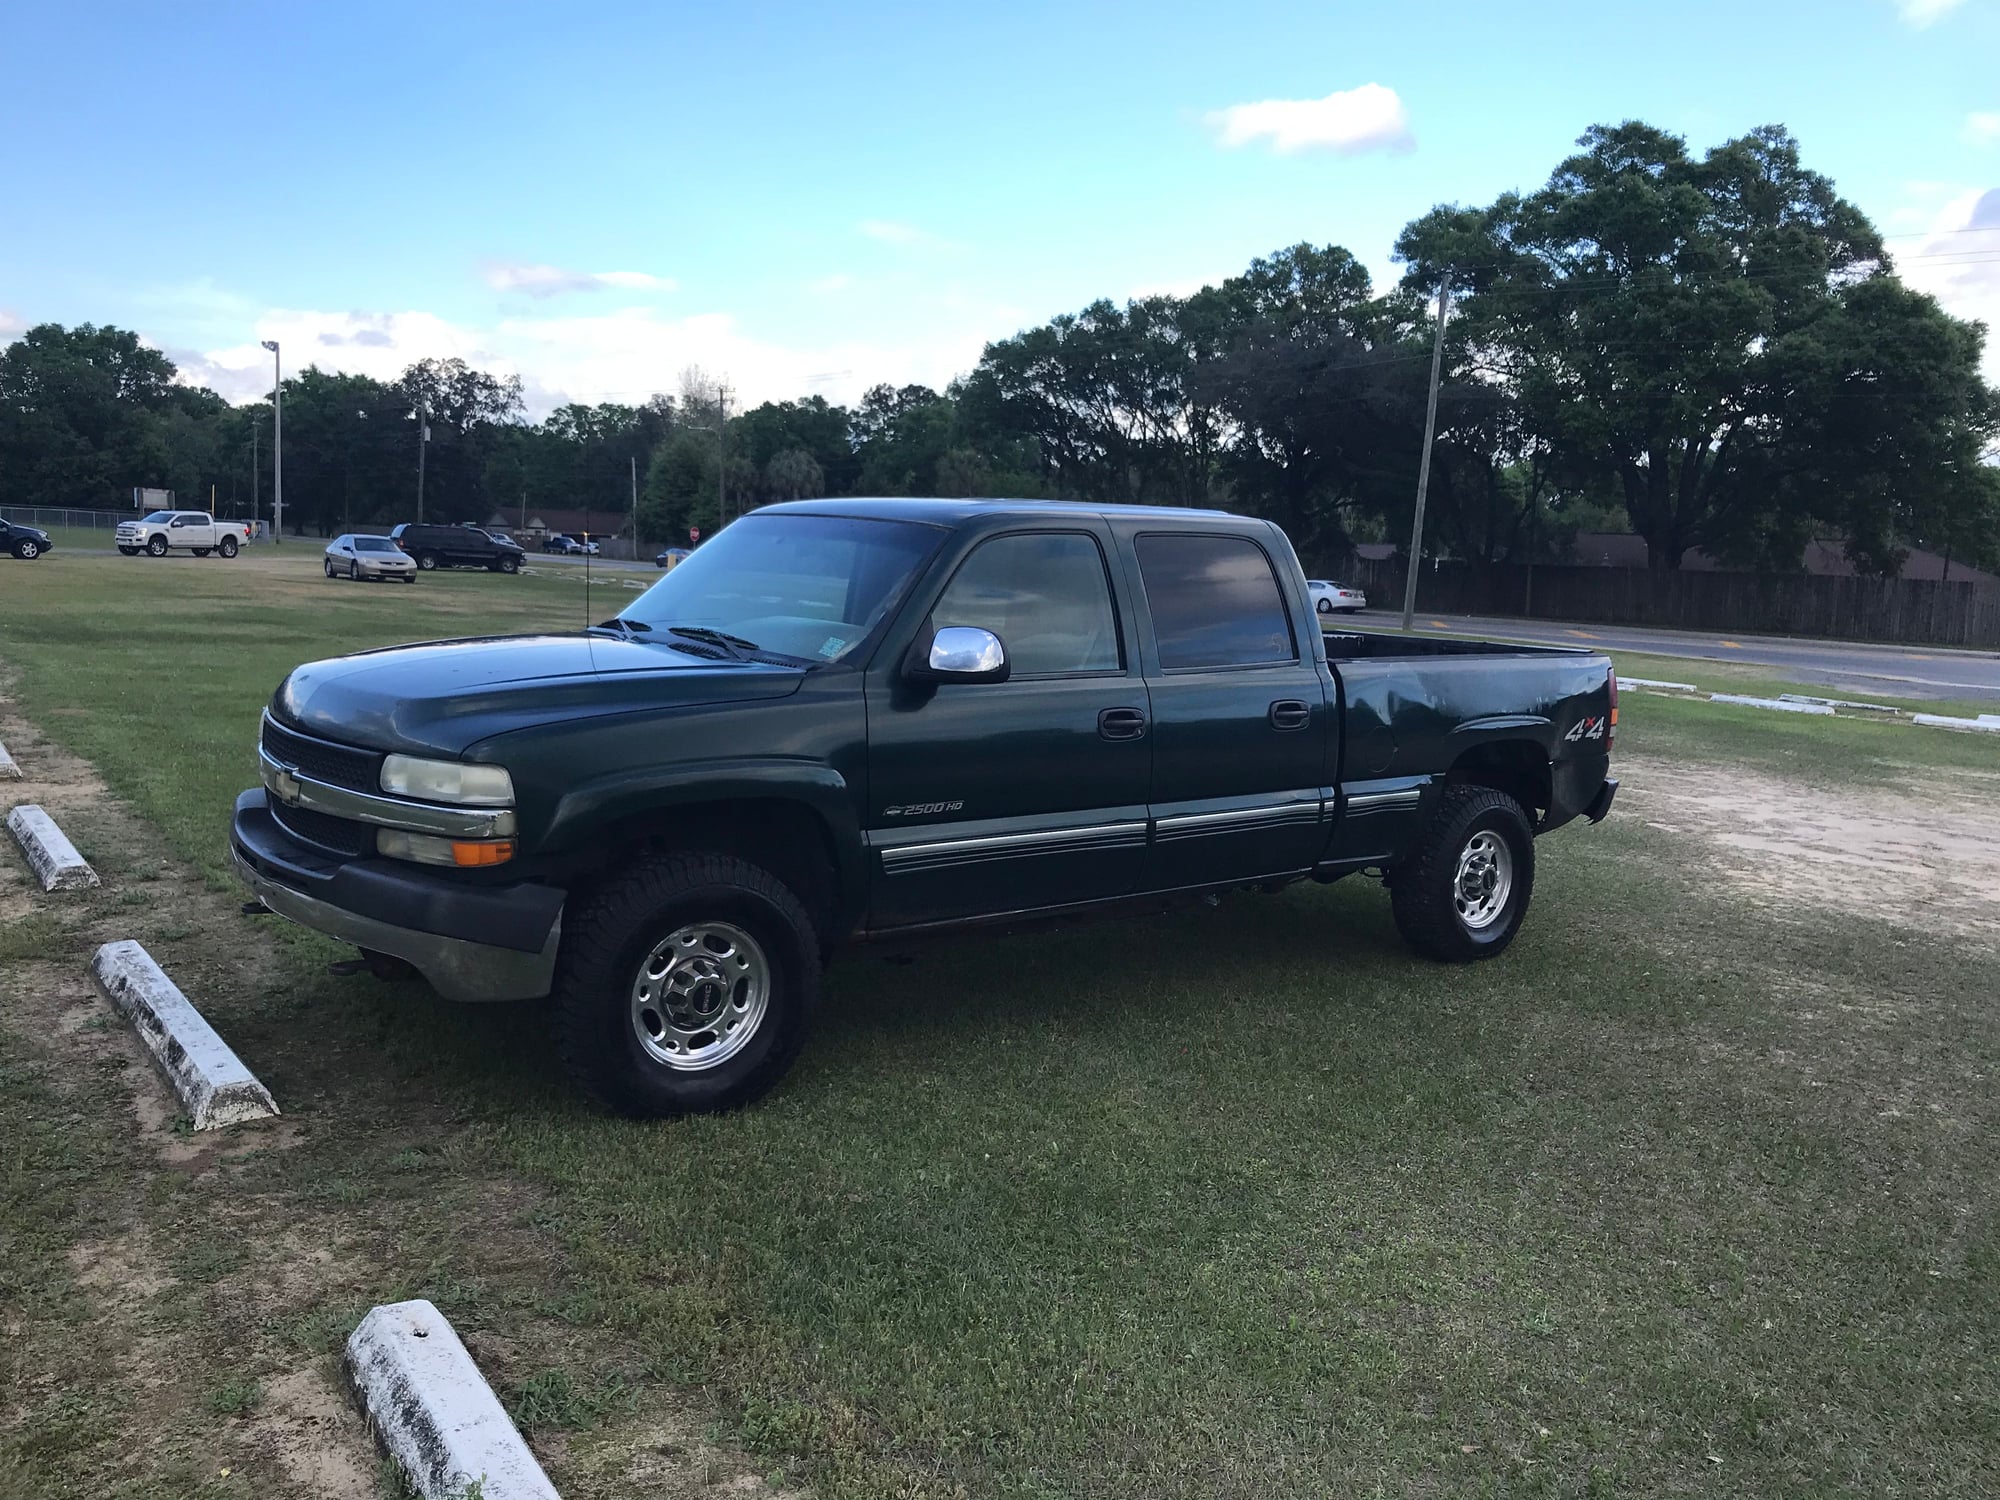 2001 Chevy Silverado 2500HD Farm Truck -SOLD - The Hull Truth - Boating 2001 Chevy 2500hd 8.1 Towing Capacity